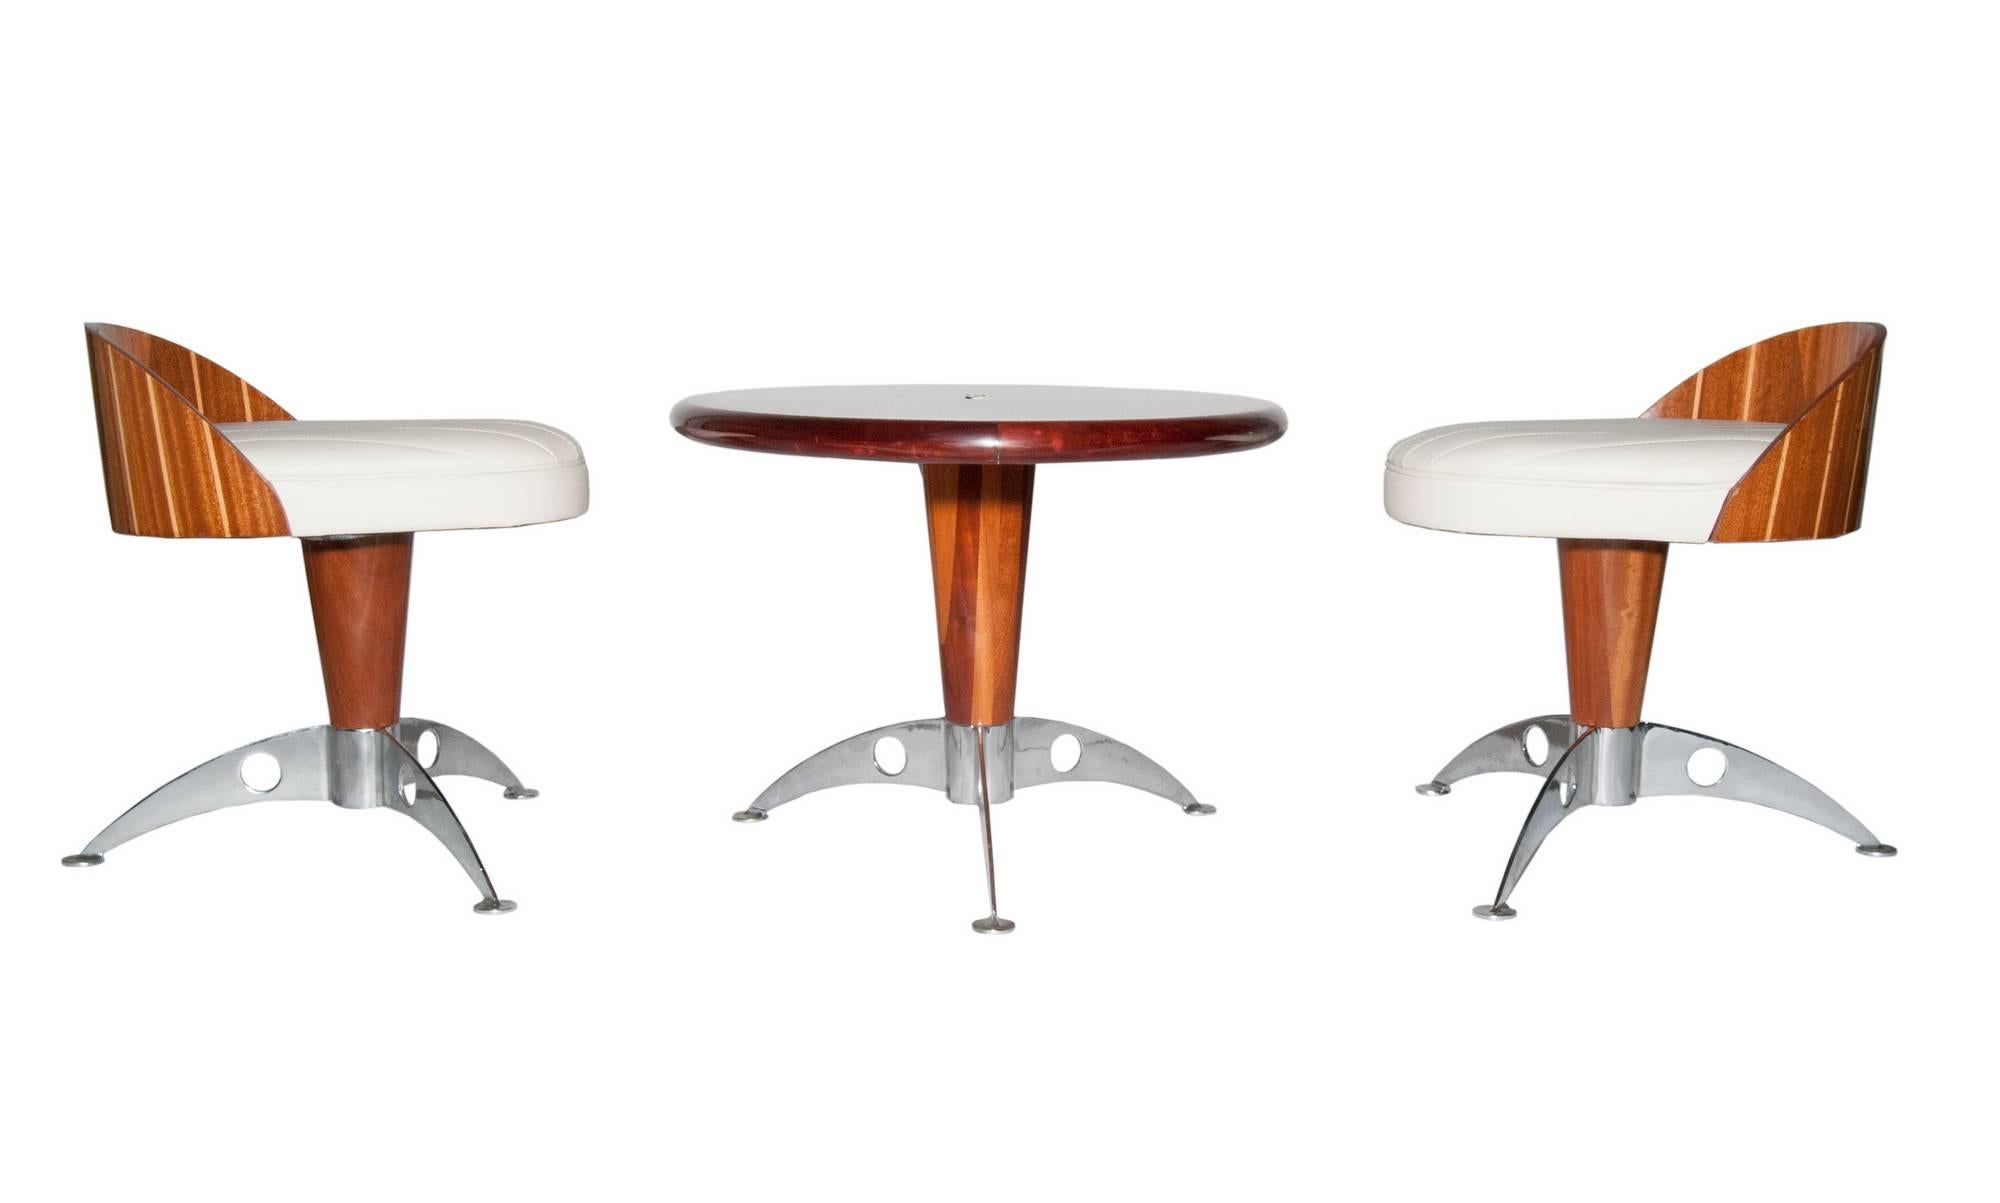 Triconfort Rivage Nautical Table and Chairs, Three Pieces 2